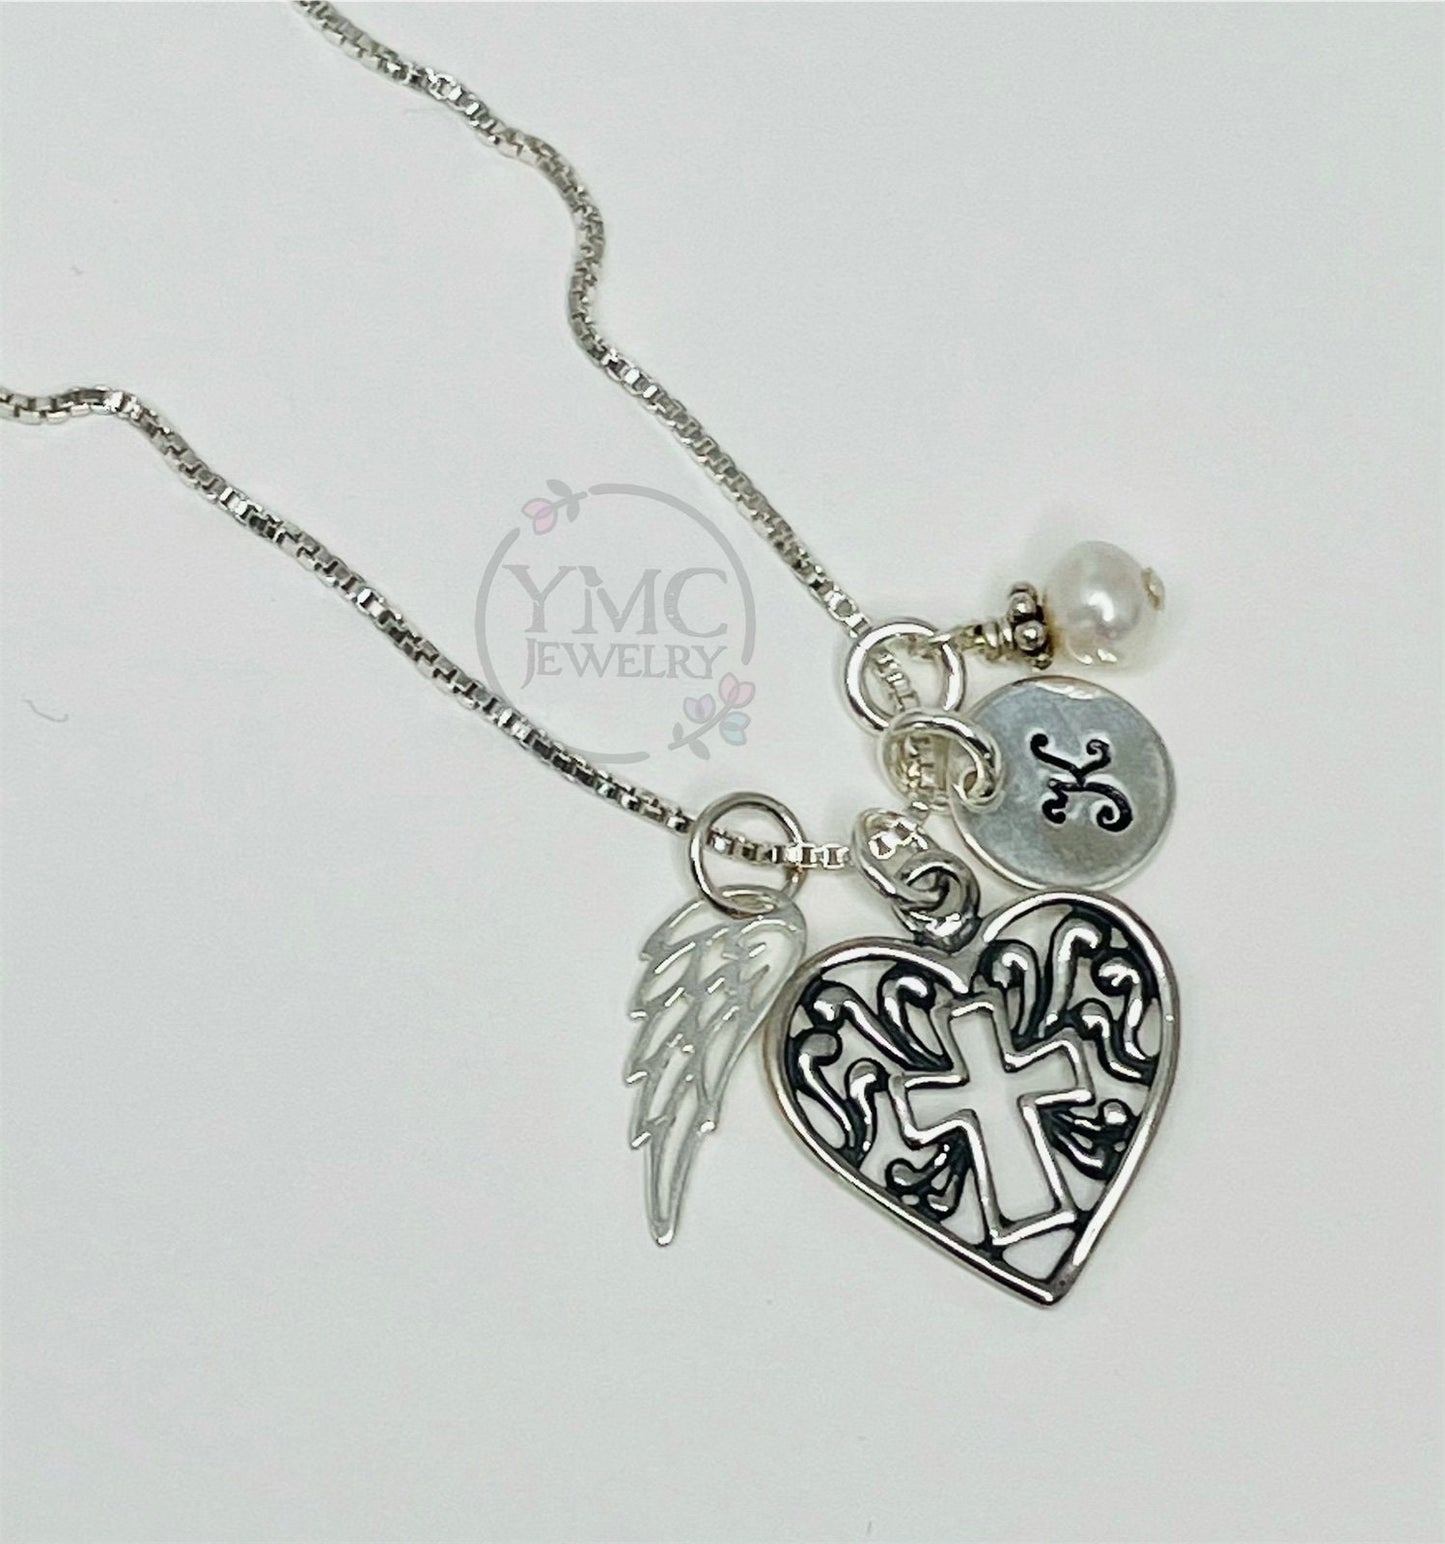 Personalized Remembrance Memorial Angel Wing Necklace,Mother's Day Gift,Sympathy Bereavement Gift,Loss of Mother Father